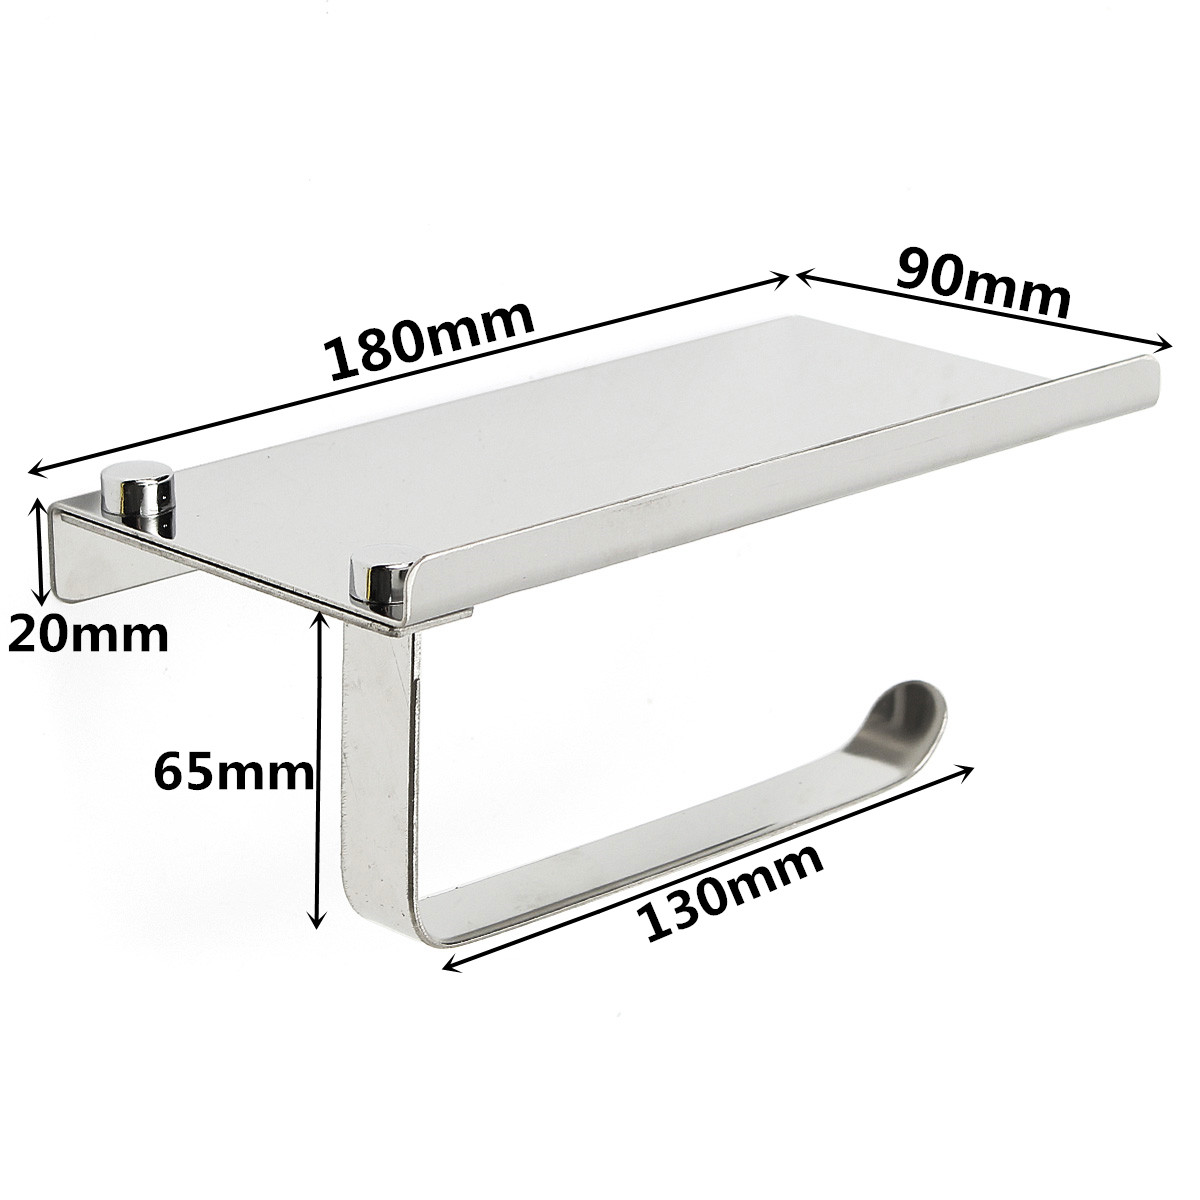 Stainless-Steel-Toilet-Roll-Tissue-Stand-Paper-Holder-Wall-Mounted-for-Home-Bathroom-Paper-Hook-1256427-2